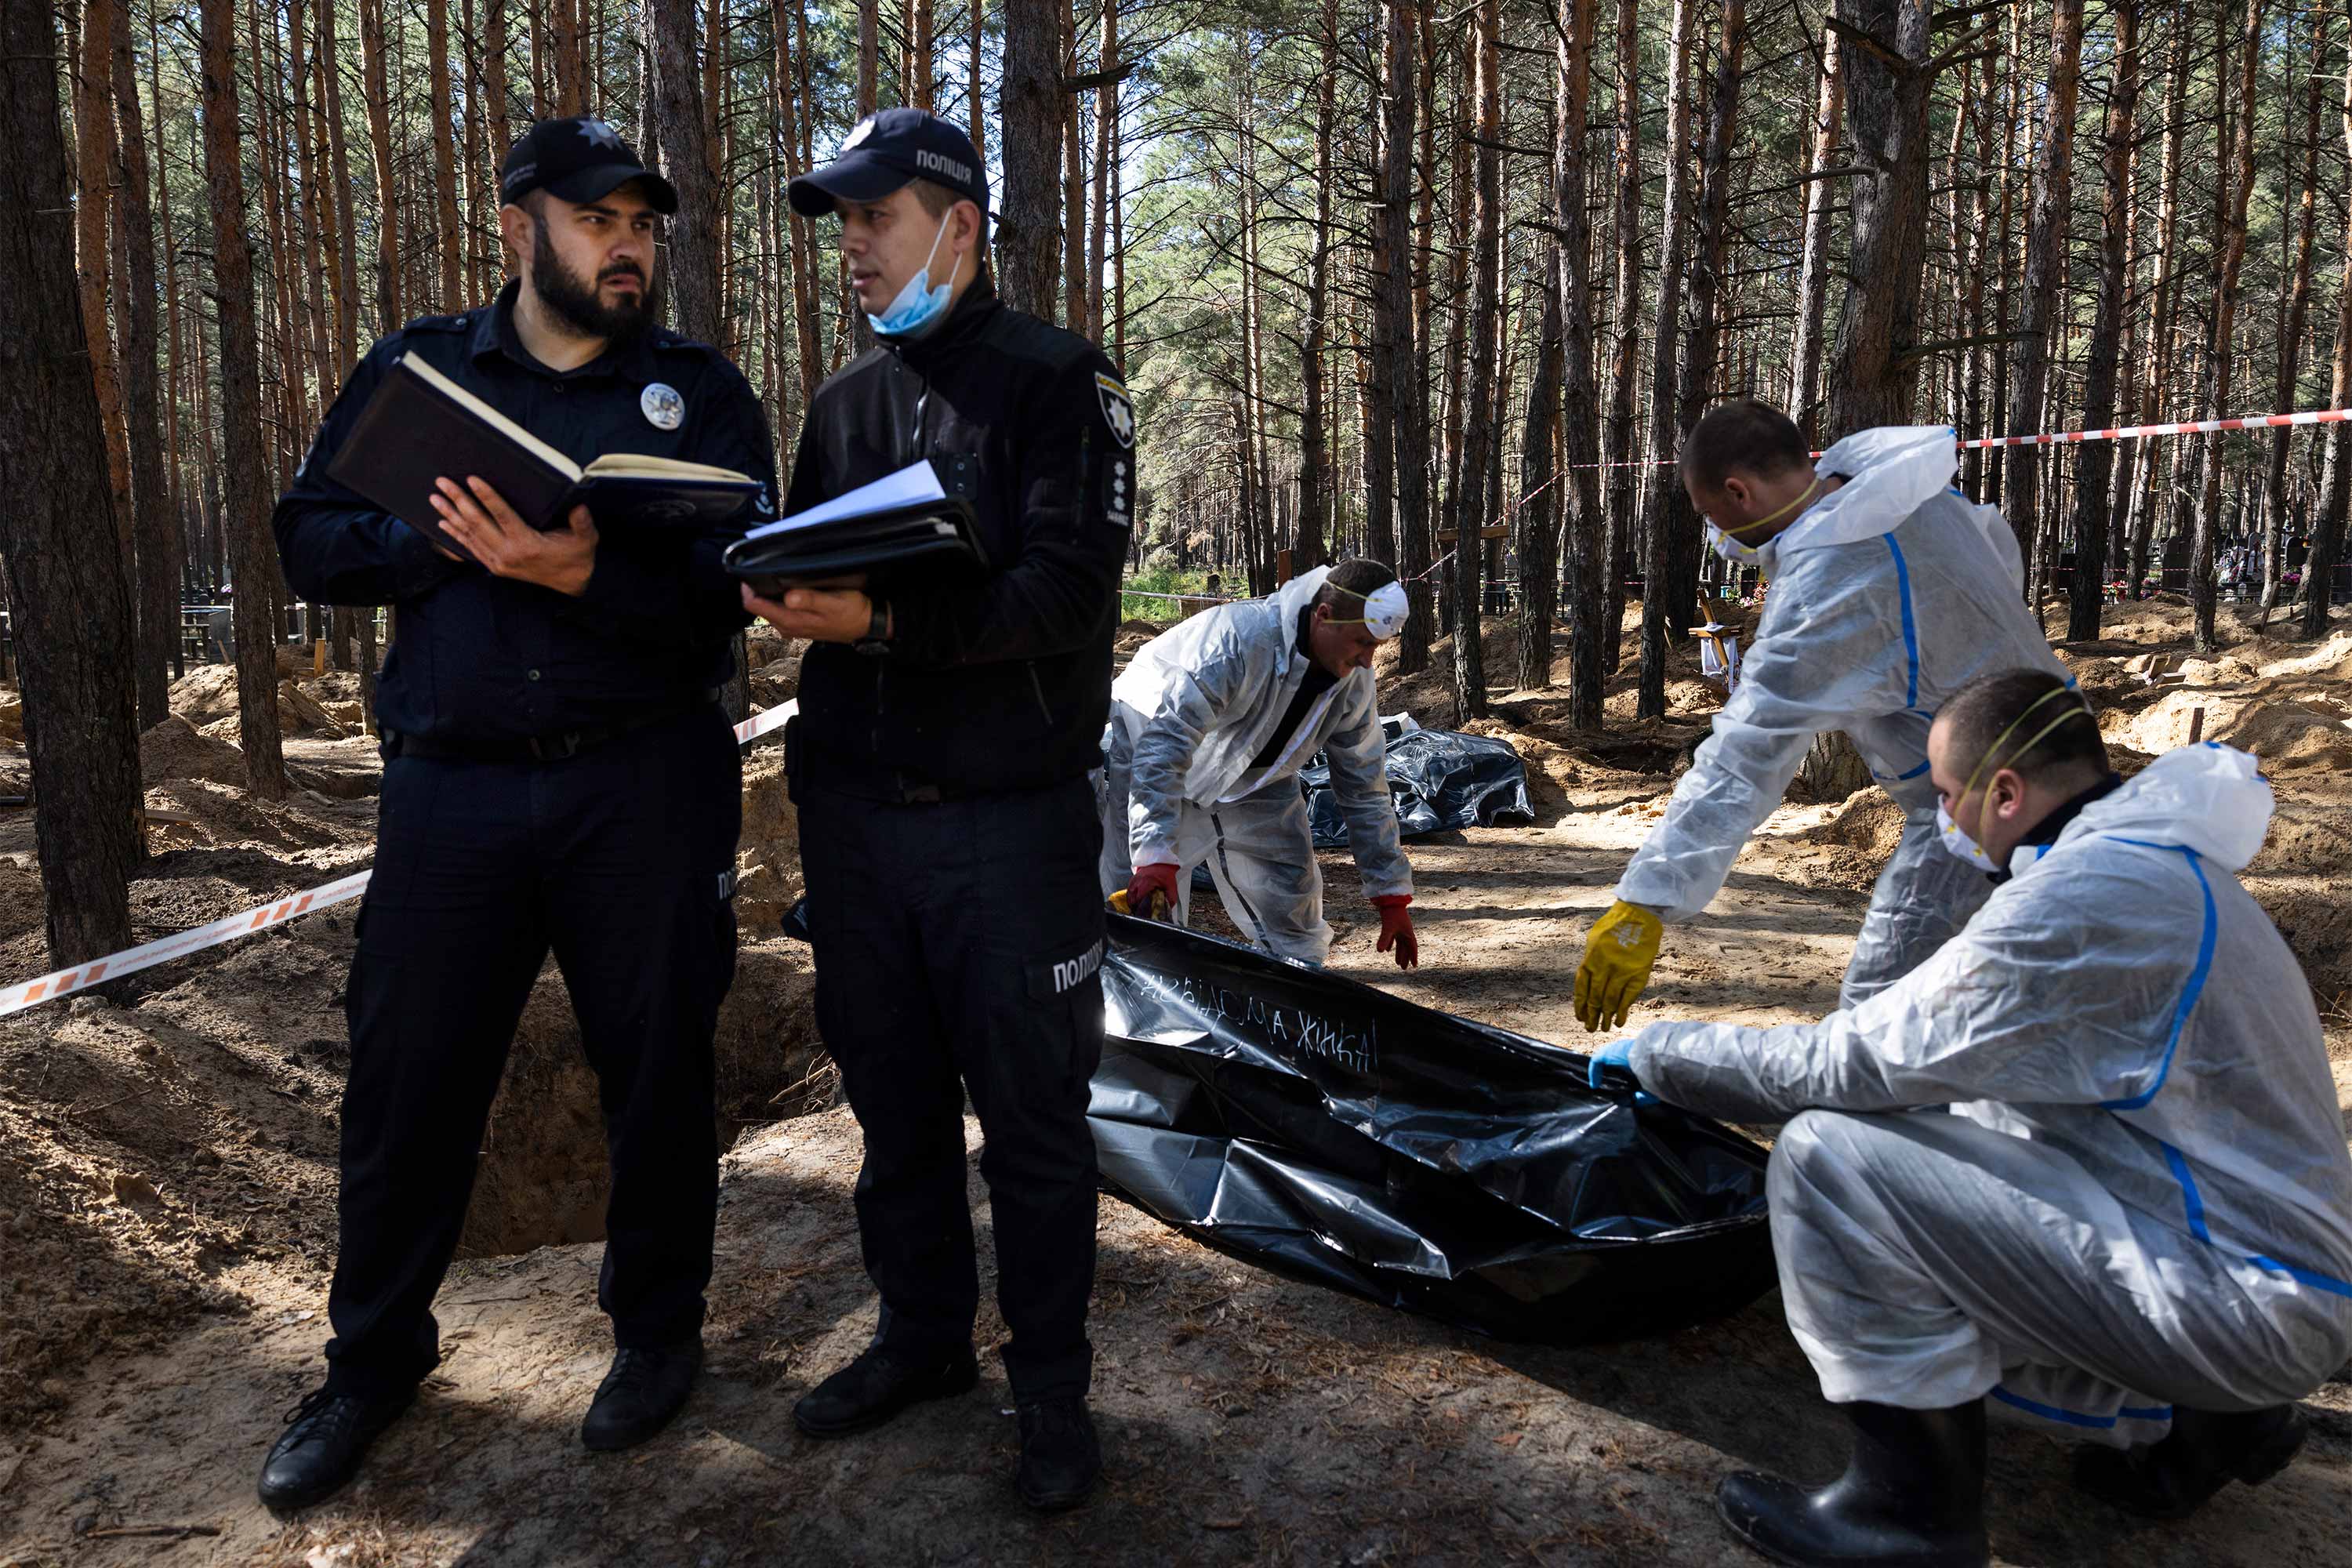 Rescue workers and forensic police exhume bodies from unidentified makeshift graves at the Pishanske cemetery on September 21, 2022 in Izium, Ukraine. The bodies will be examined by forensic officials for possible war crimes. Izium was liberated from Russian occupation after six months. Approximately 440 bodies are buried at the cemetery, so far over 338 bodies have been exhumed, taken to the morgue in Kharkiv. © Paula Bronstein/Getty Images